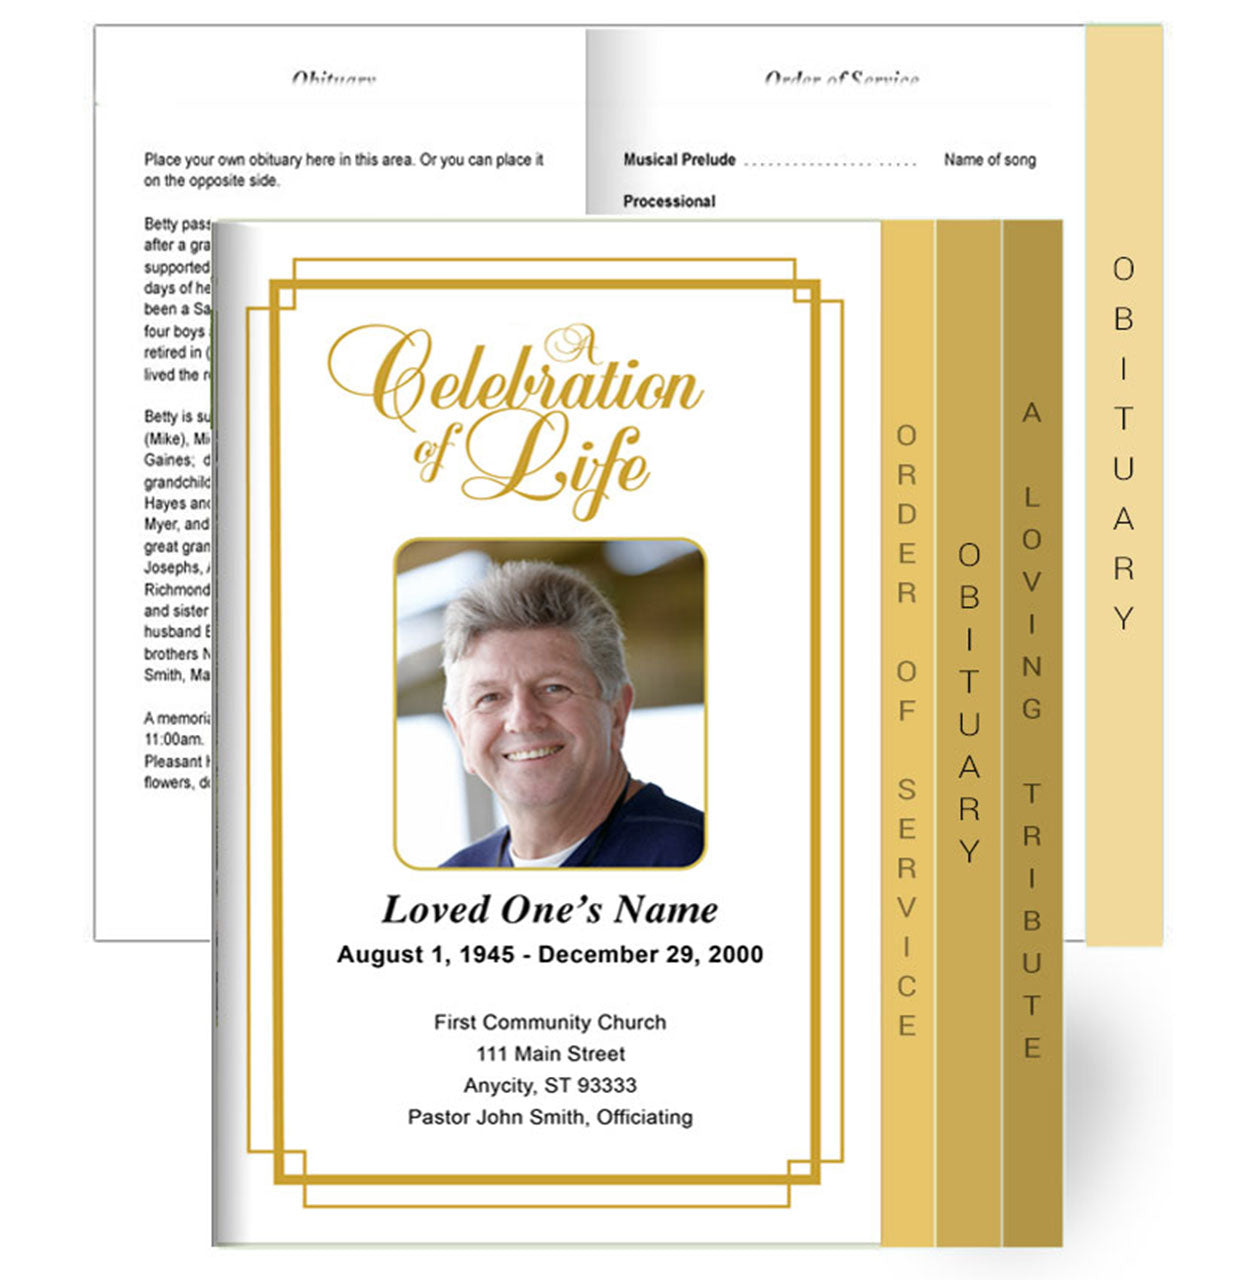 Windsor Tabloid 8-Sided Graduated Funeral Program Template.